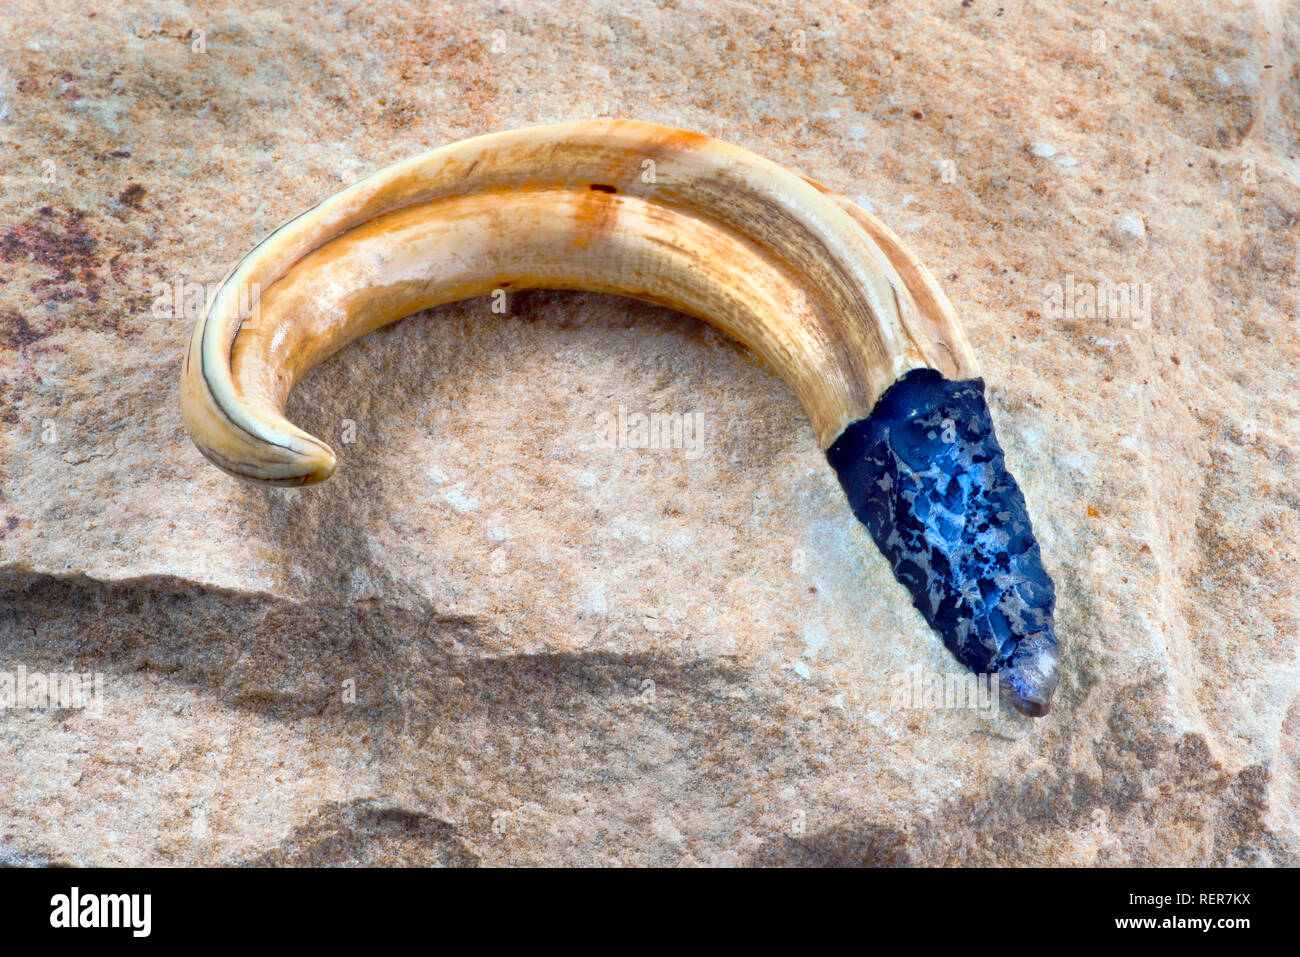 American Indian flint knife or hand tool. Stock Photo